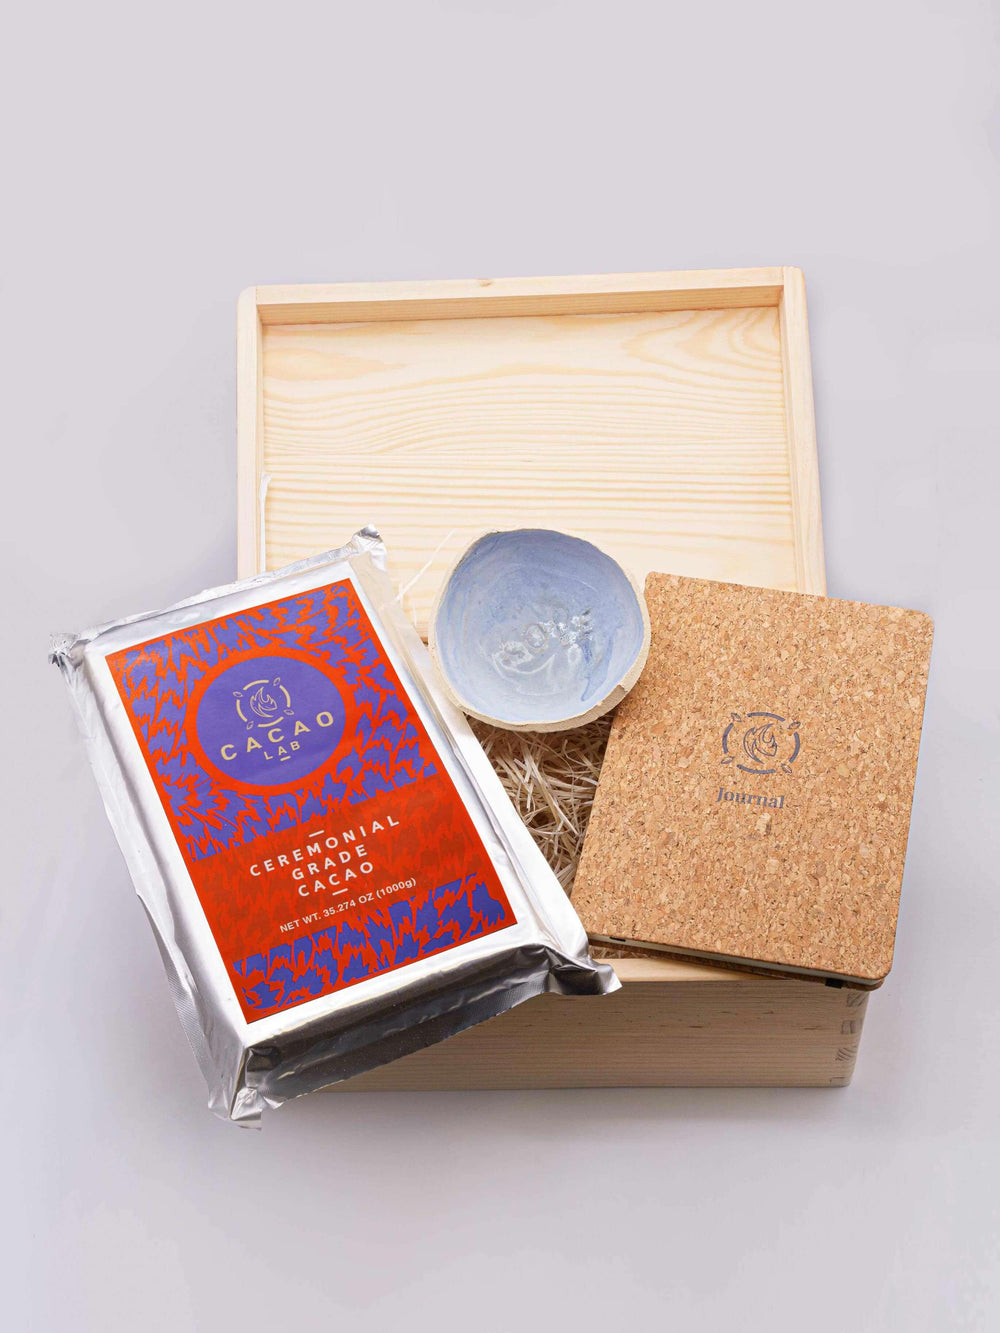 Cacao dieta box with ceremonial cacao, clay bowl, and cacao meditation journal